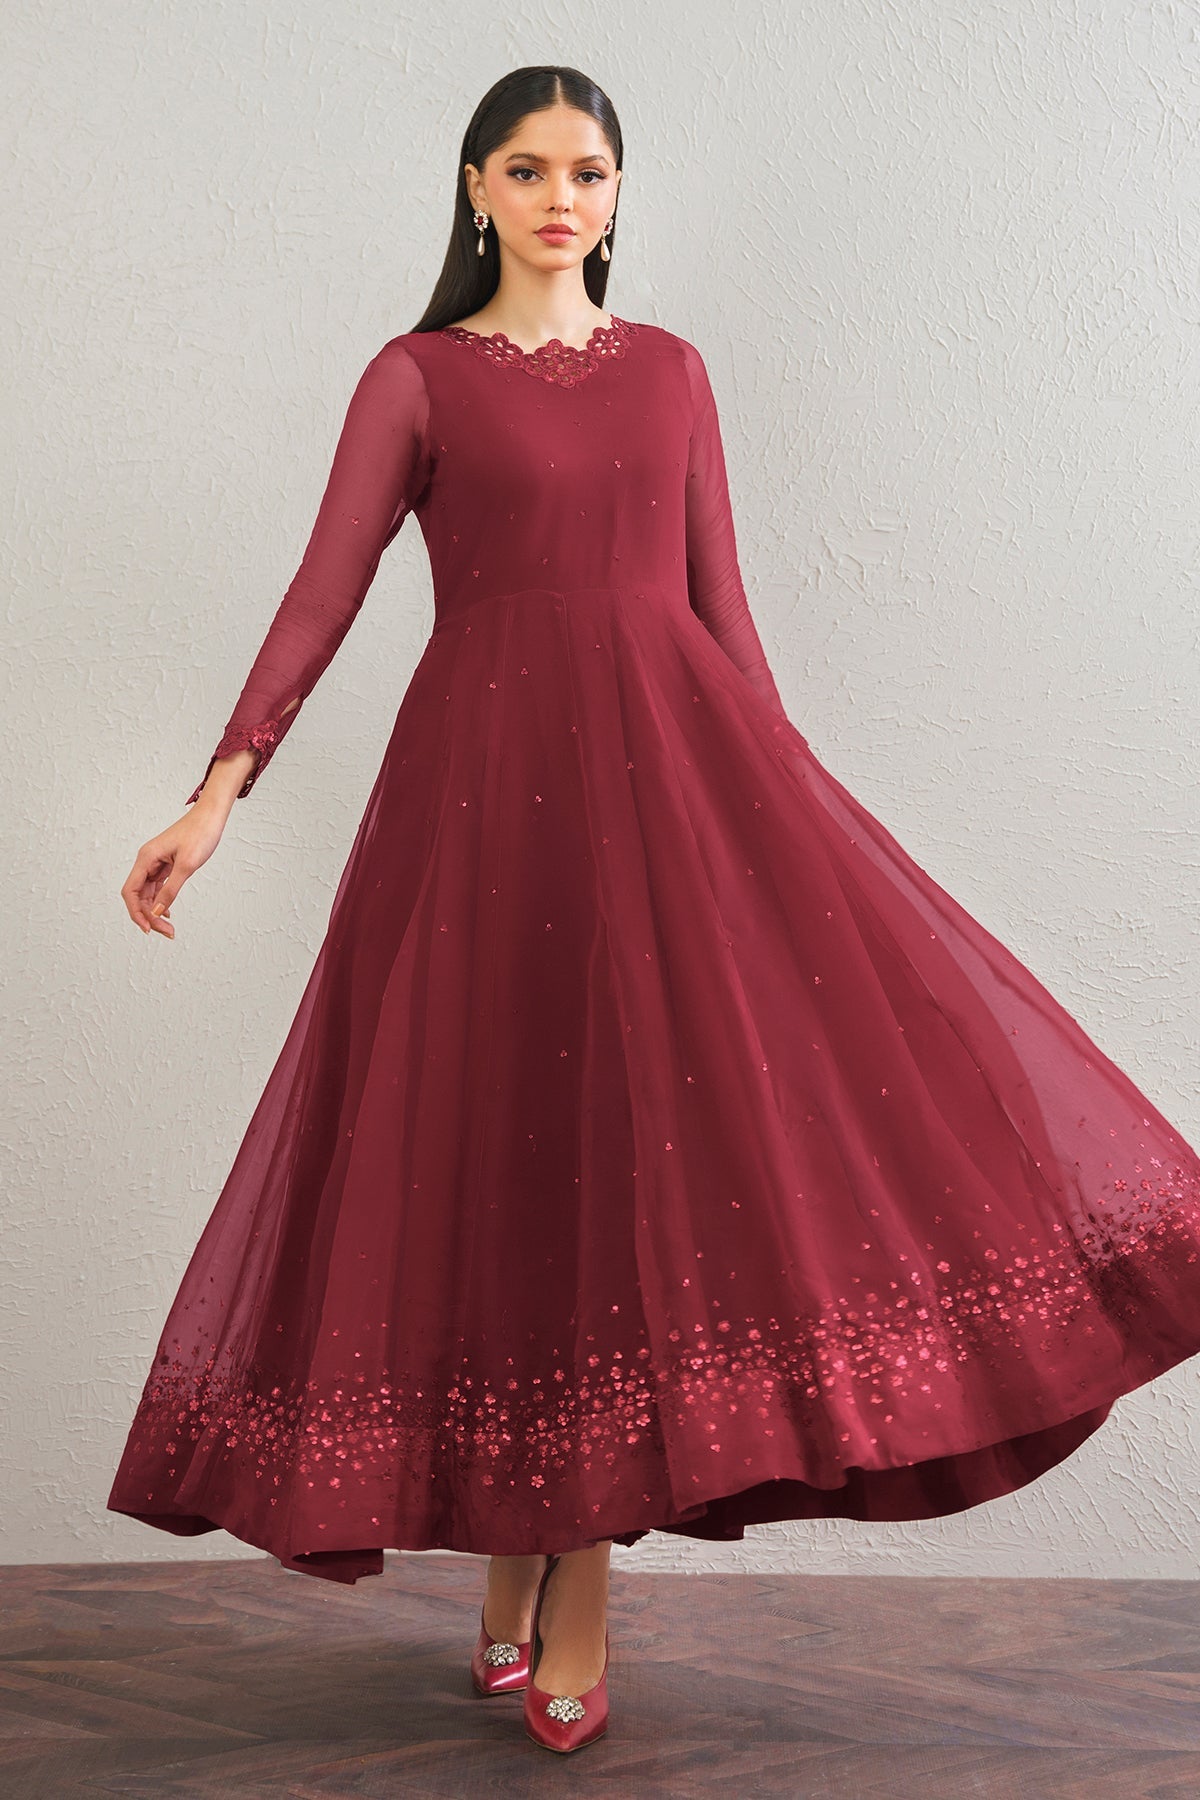 EMBROIDERED CHIFFON FROCK PR-901